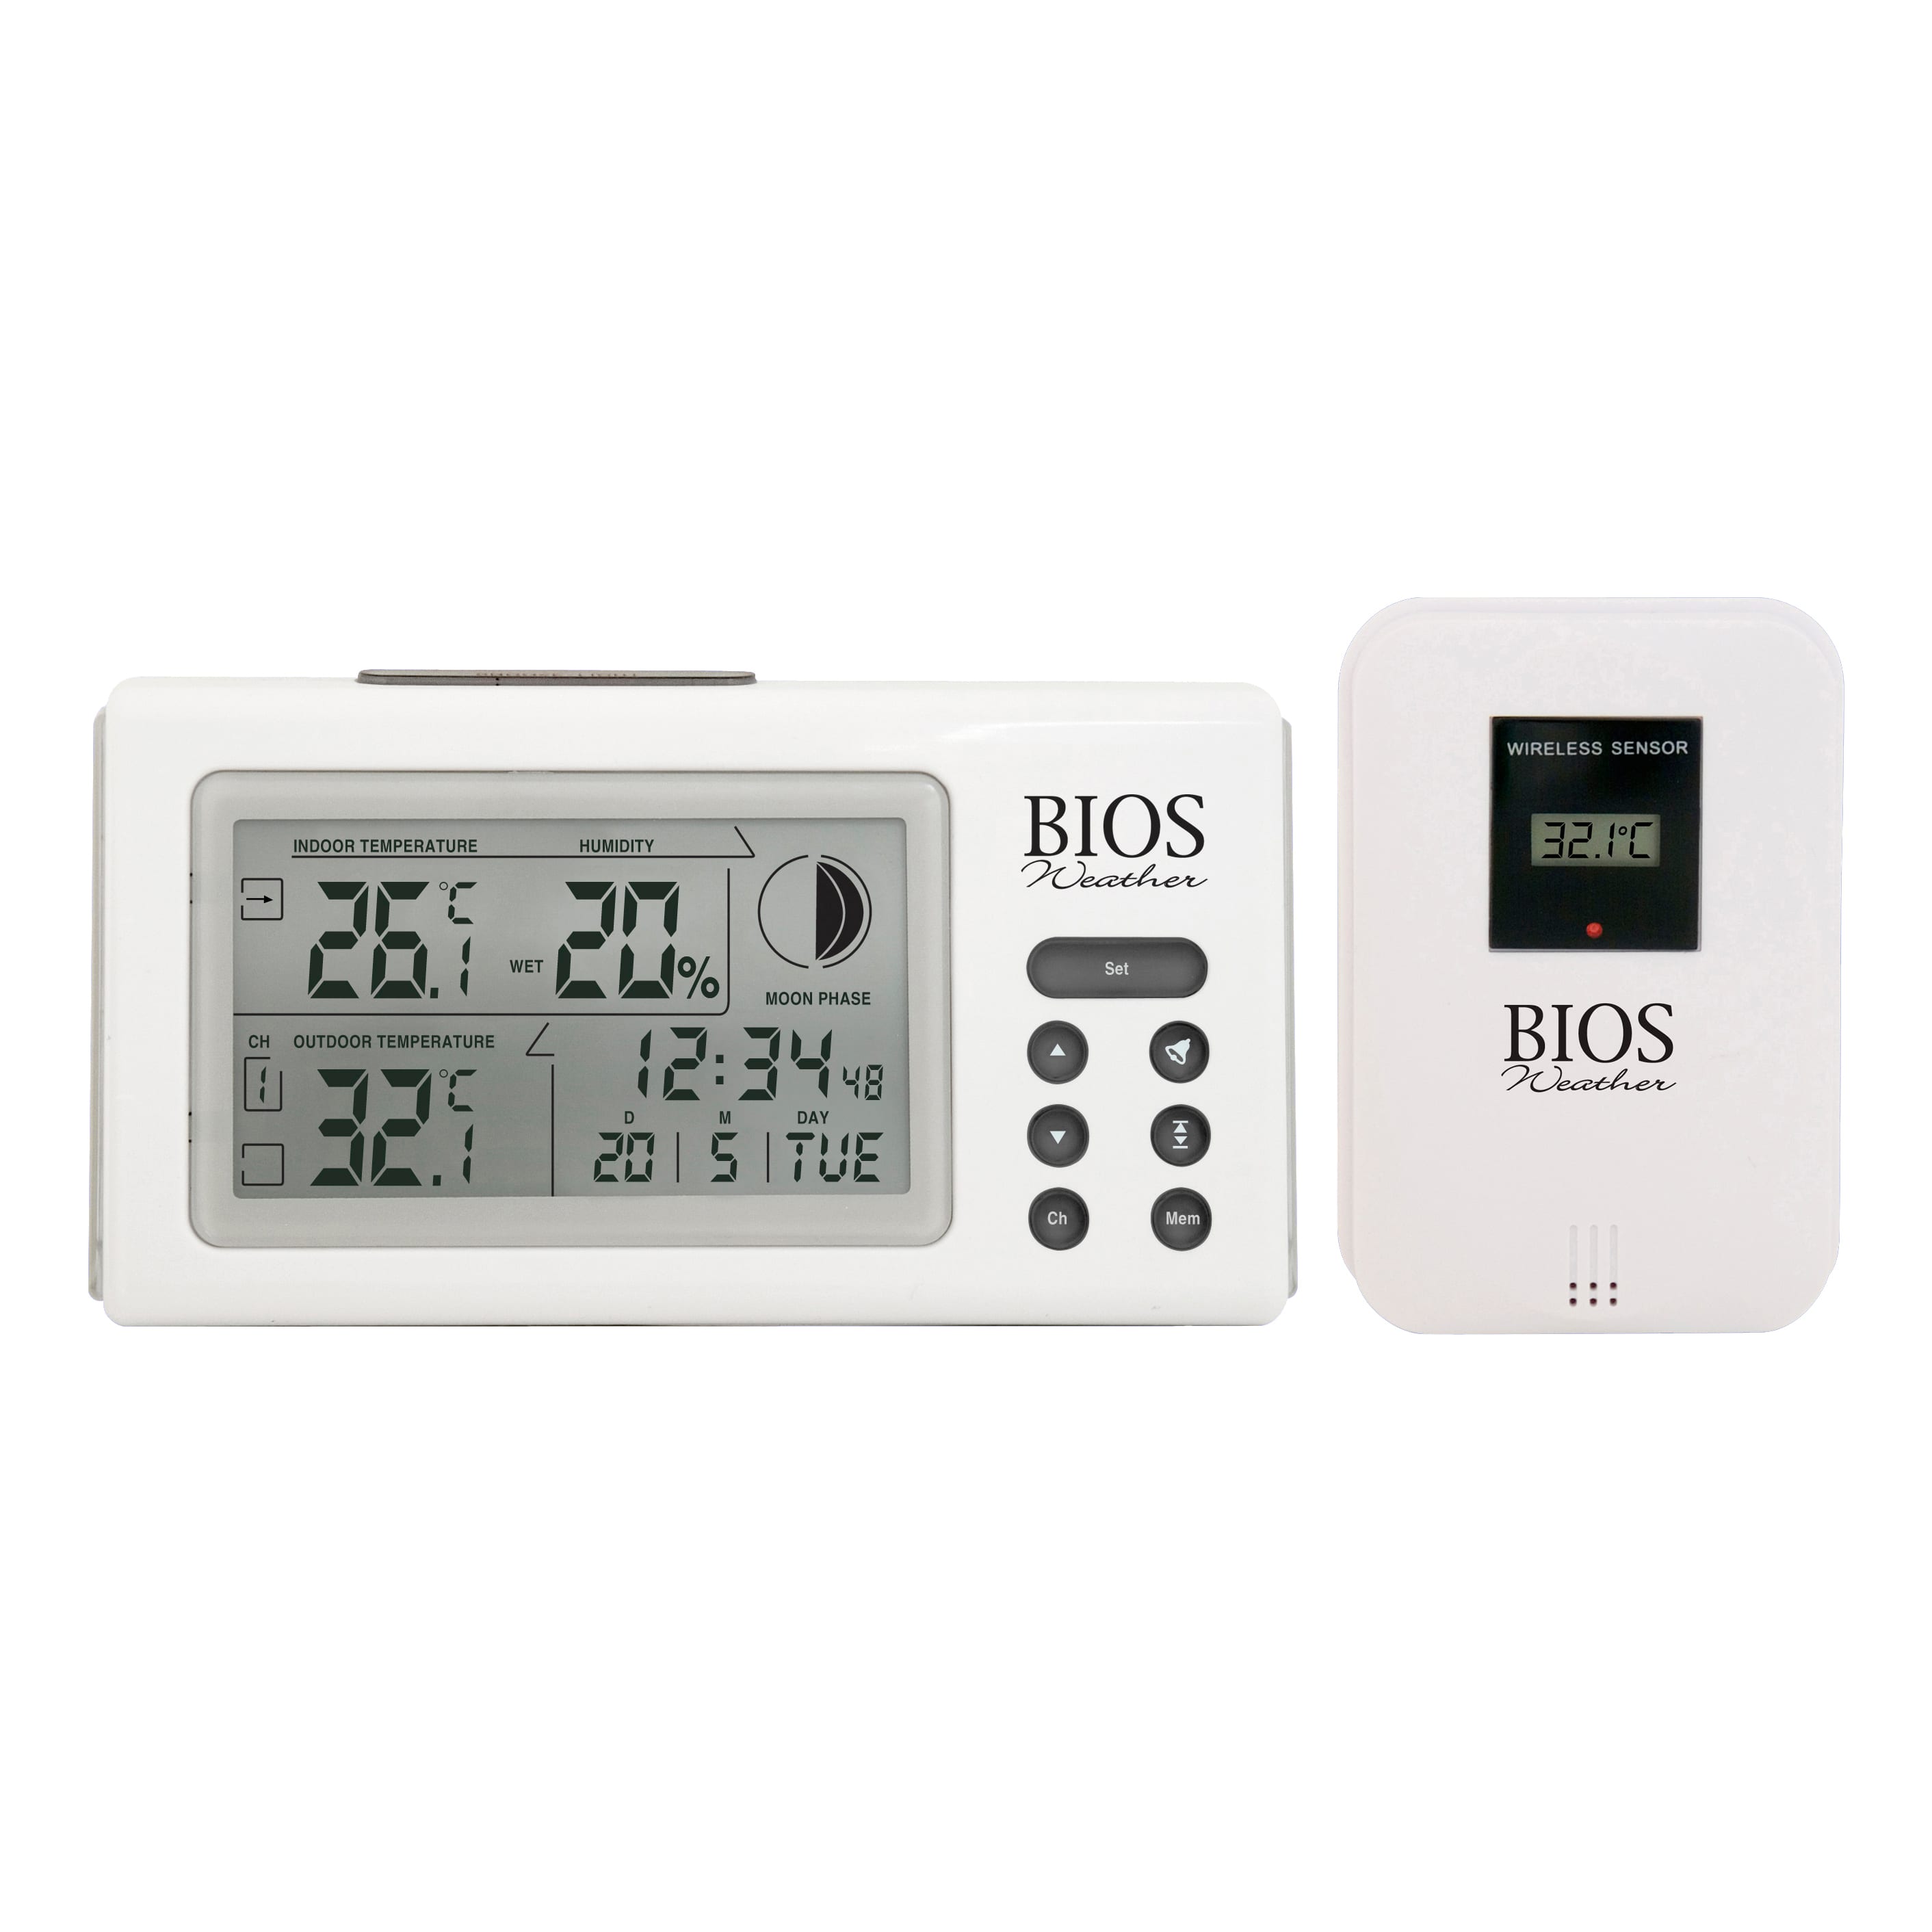 Thermor Bios Indoor/Outdoor Wireless Thermometer (Silver)